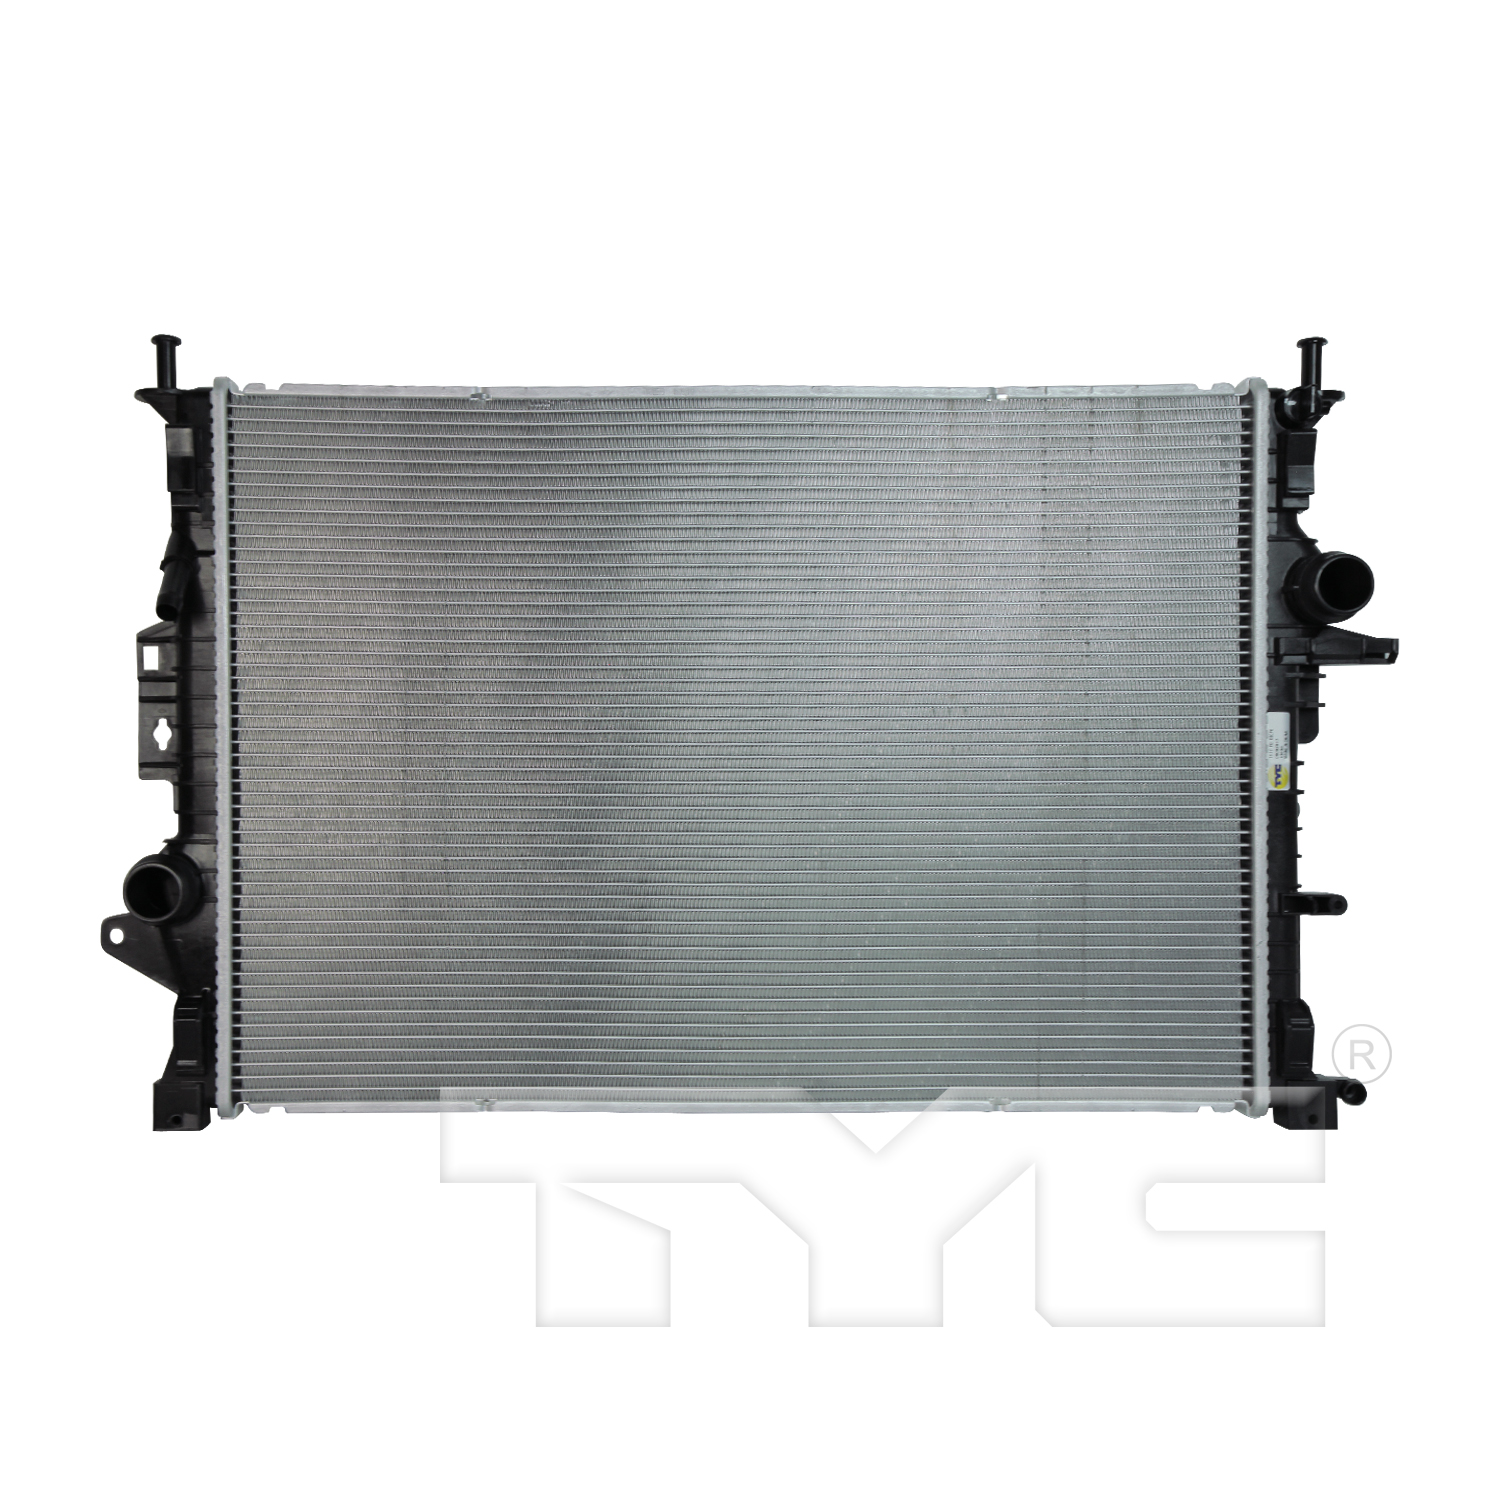 Aftermarket RADIATORS for FORD - ESCAPE, ESCAPE,14-19,Radiator assembly